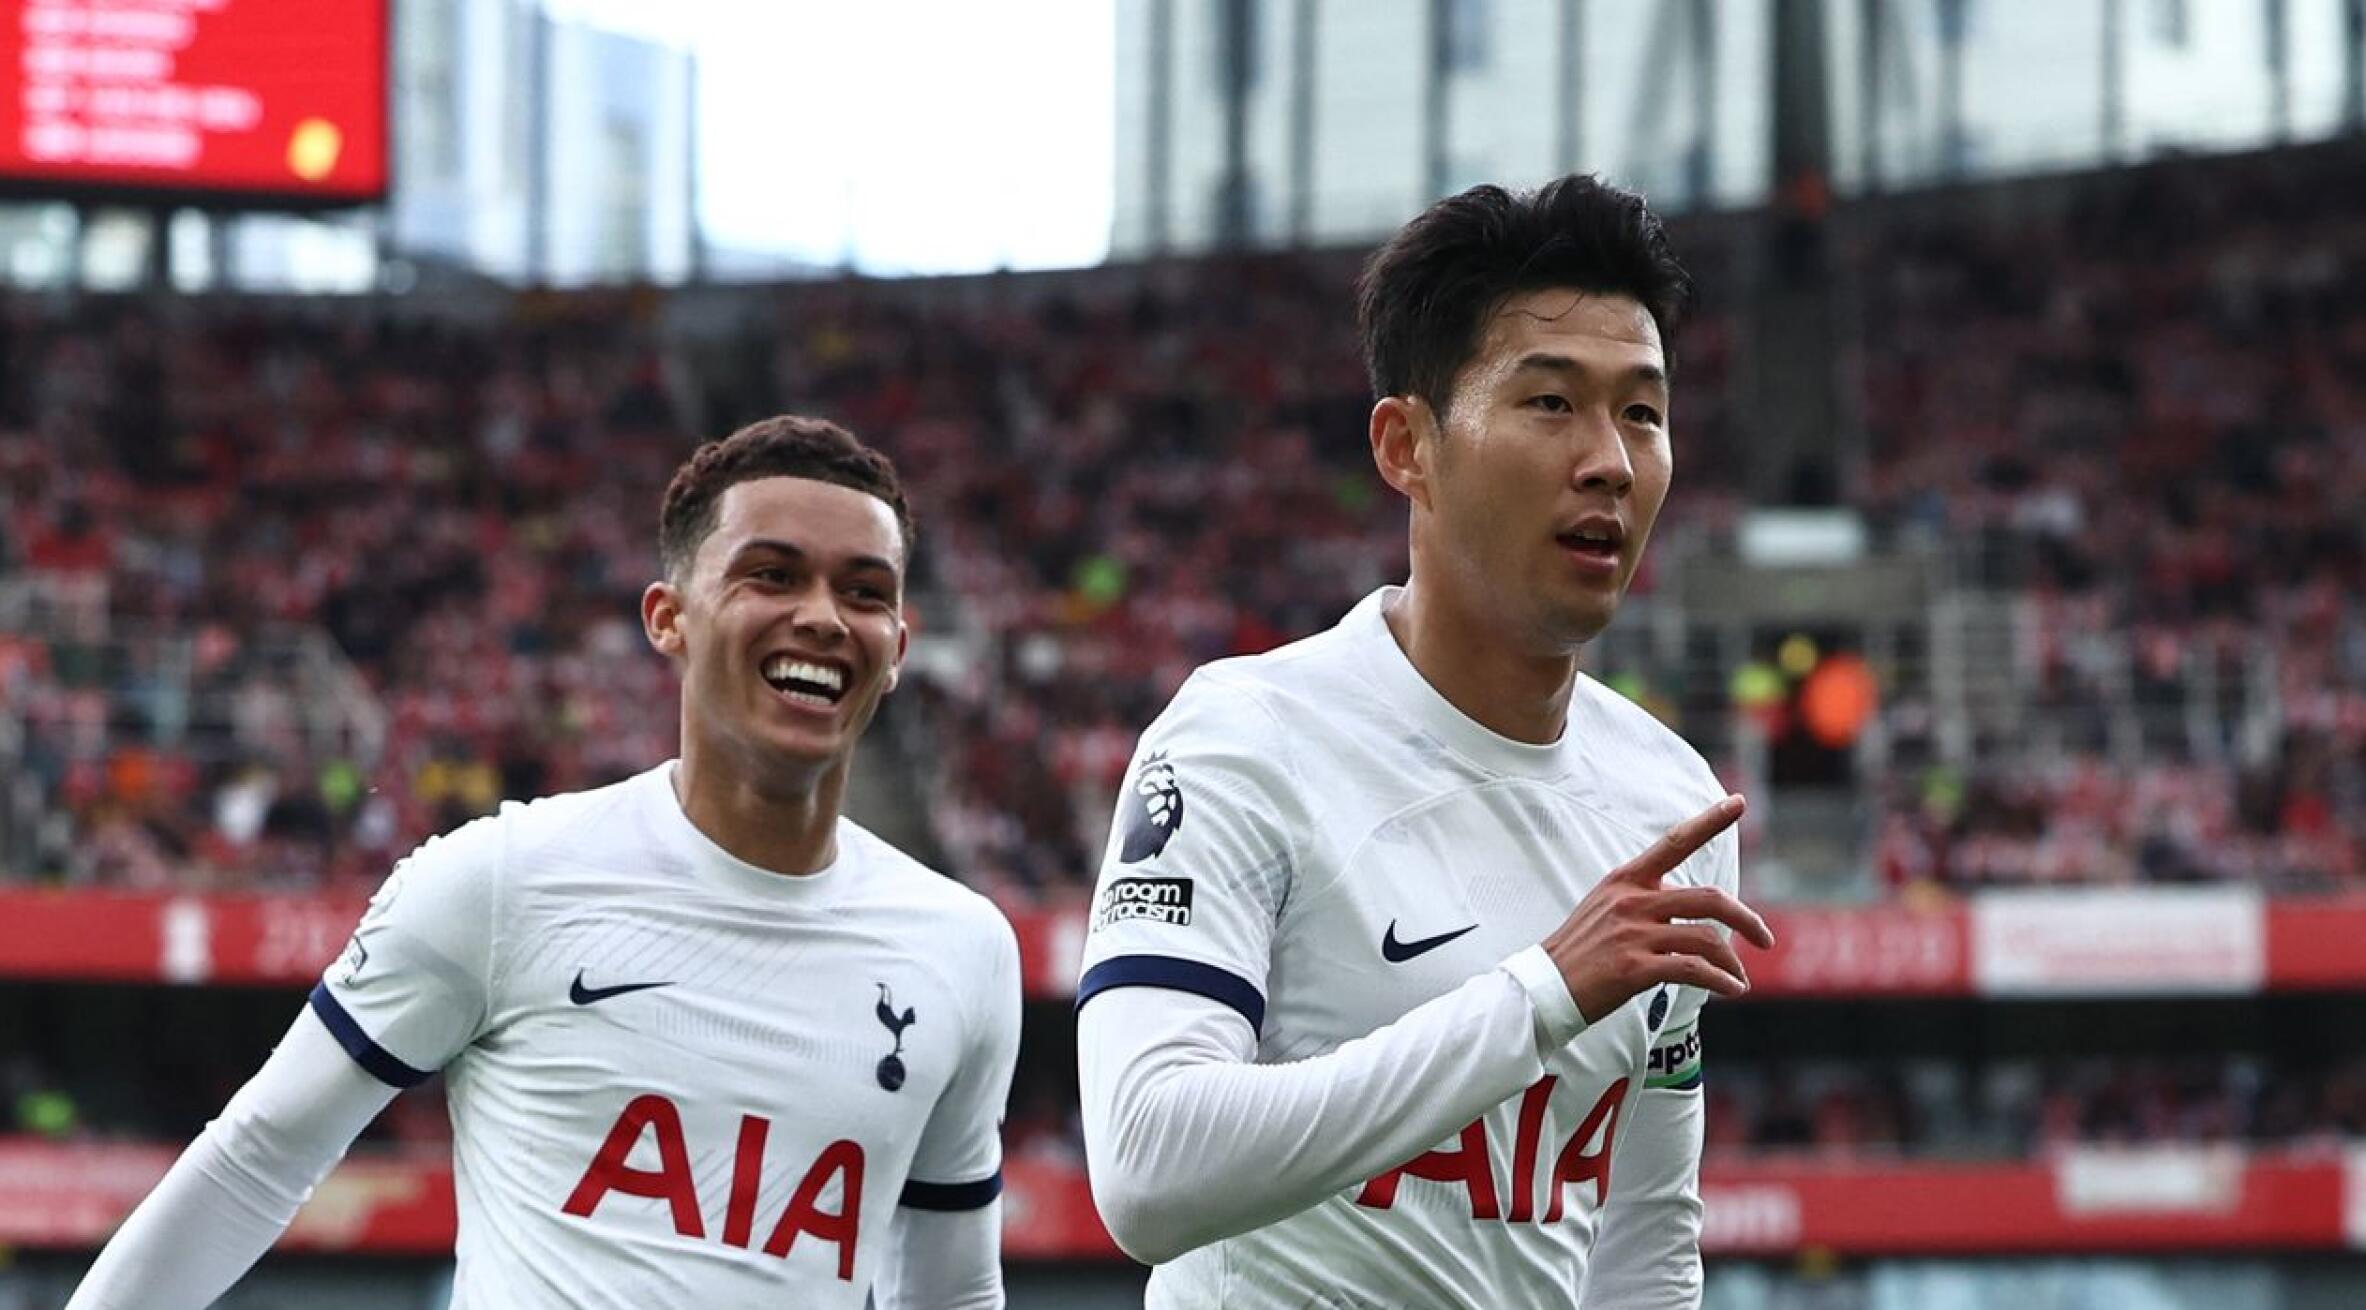 Son hails Spurs' 'great character' after point earned at Arsenal